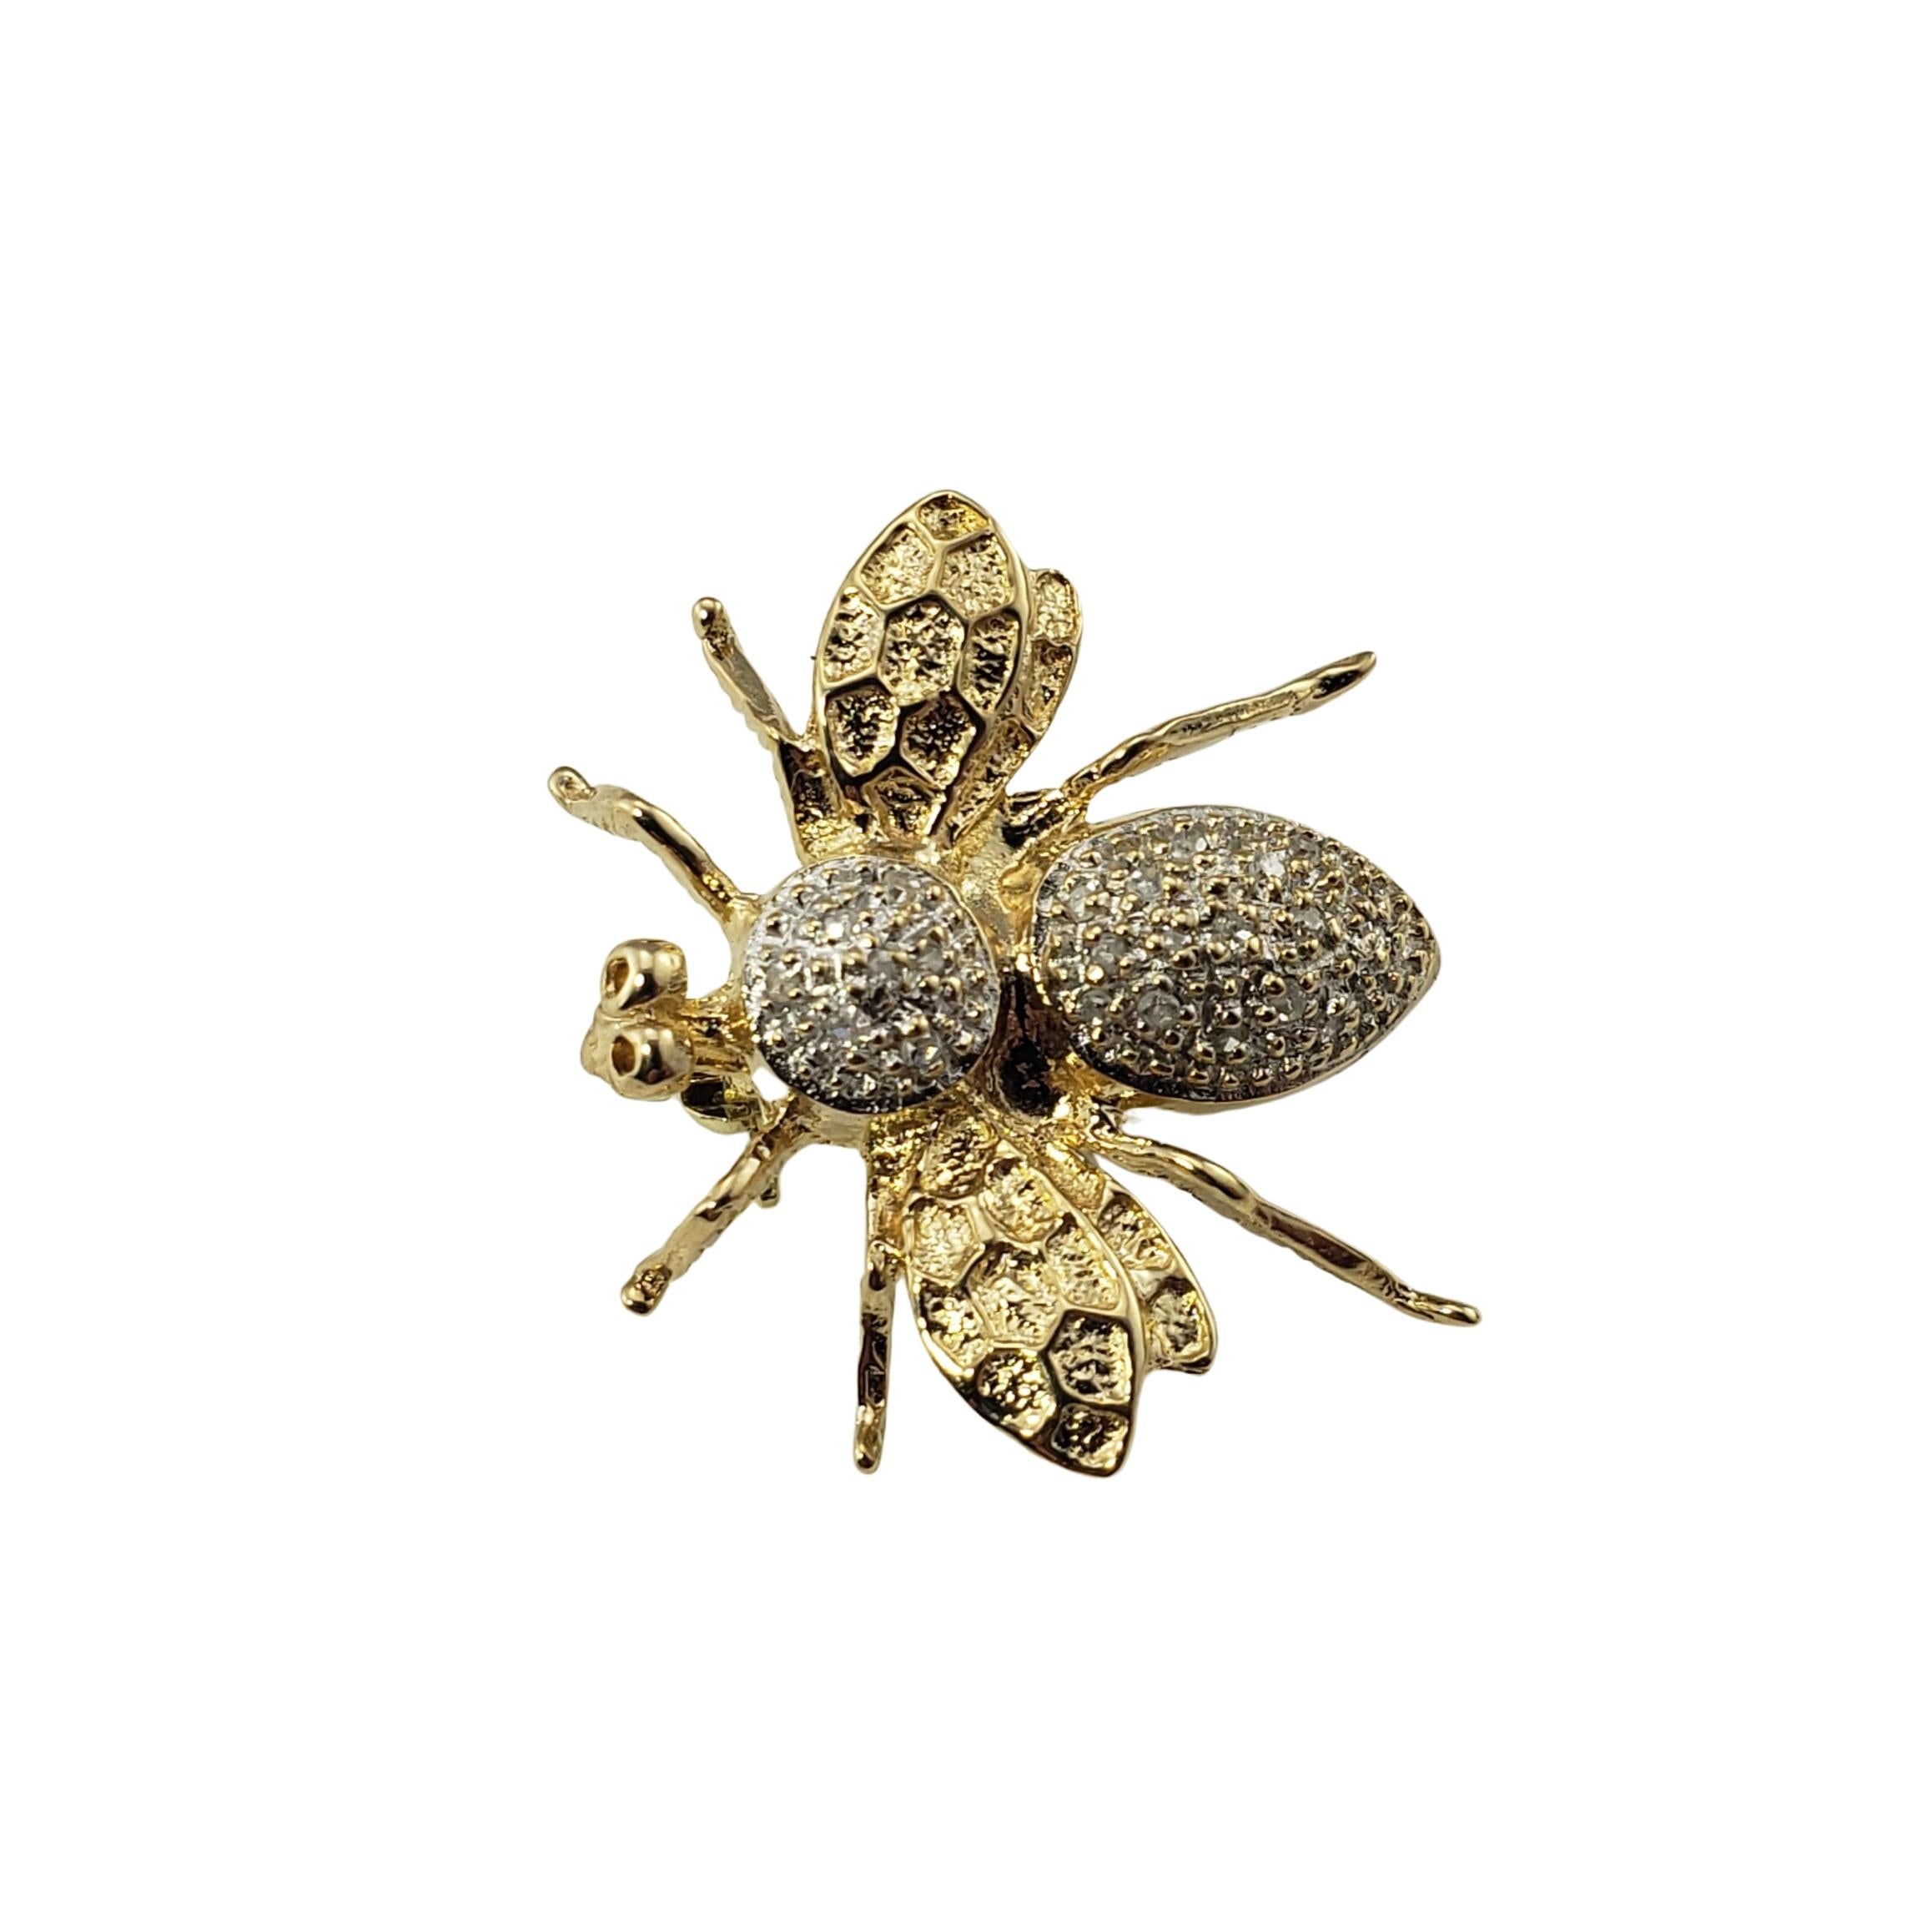 Vintage 14 Karat Yellow Gold and Diamond Bee Brooch/Pendant-

This lovely bee pin is decorated with 10 round single cut diamonds set in beautifully detailed 14K yellow gold.  Can be worn as a brooch or a pendant.

Approximate total diamond weight: 